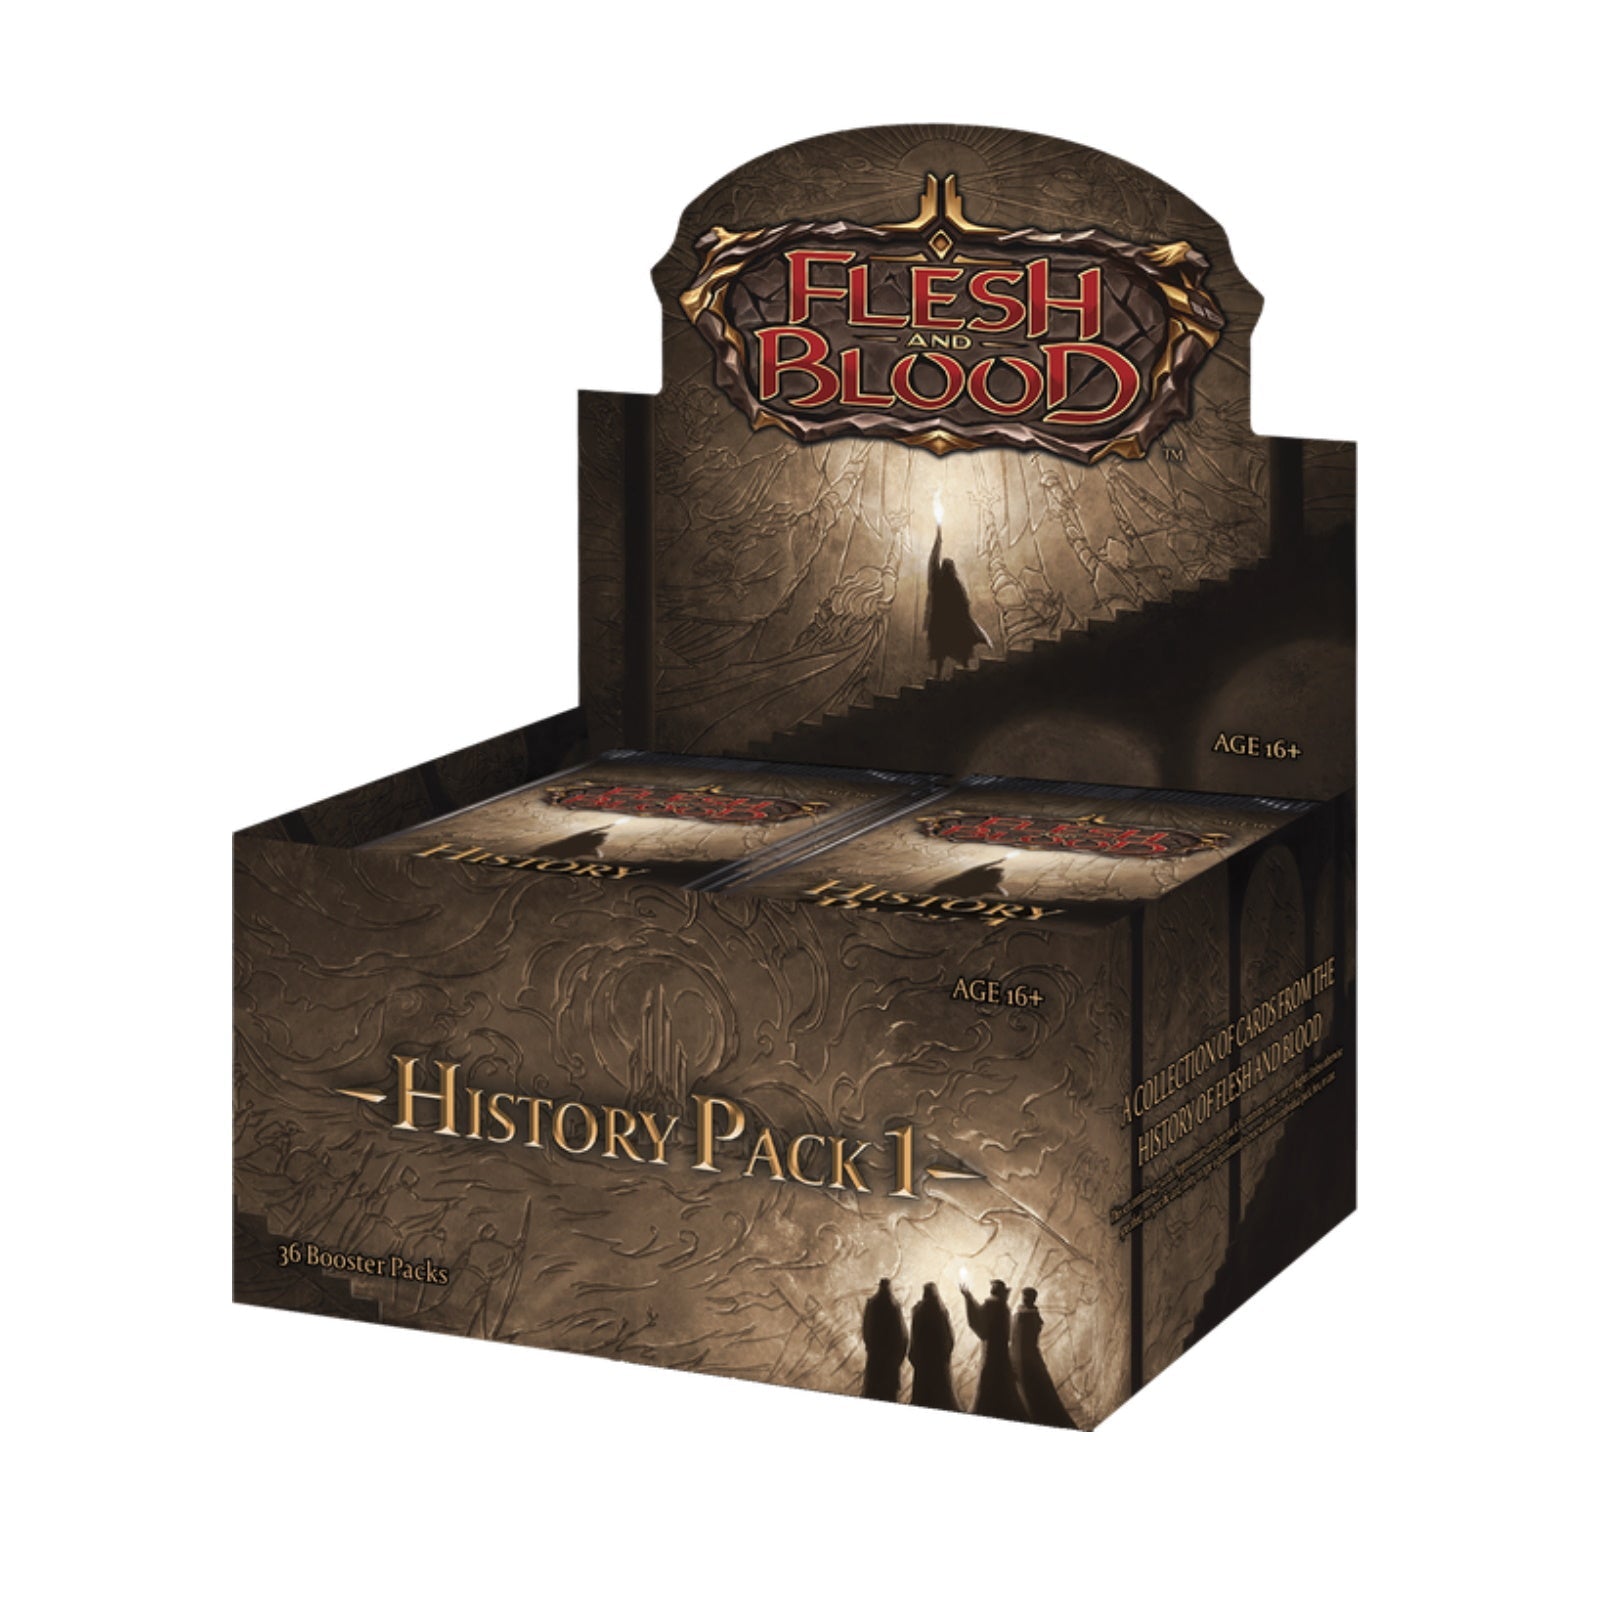 Flesh and Blood History Pack 1- BOX of 36 Booster Packs